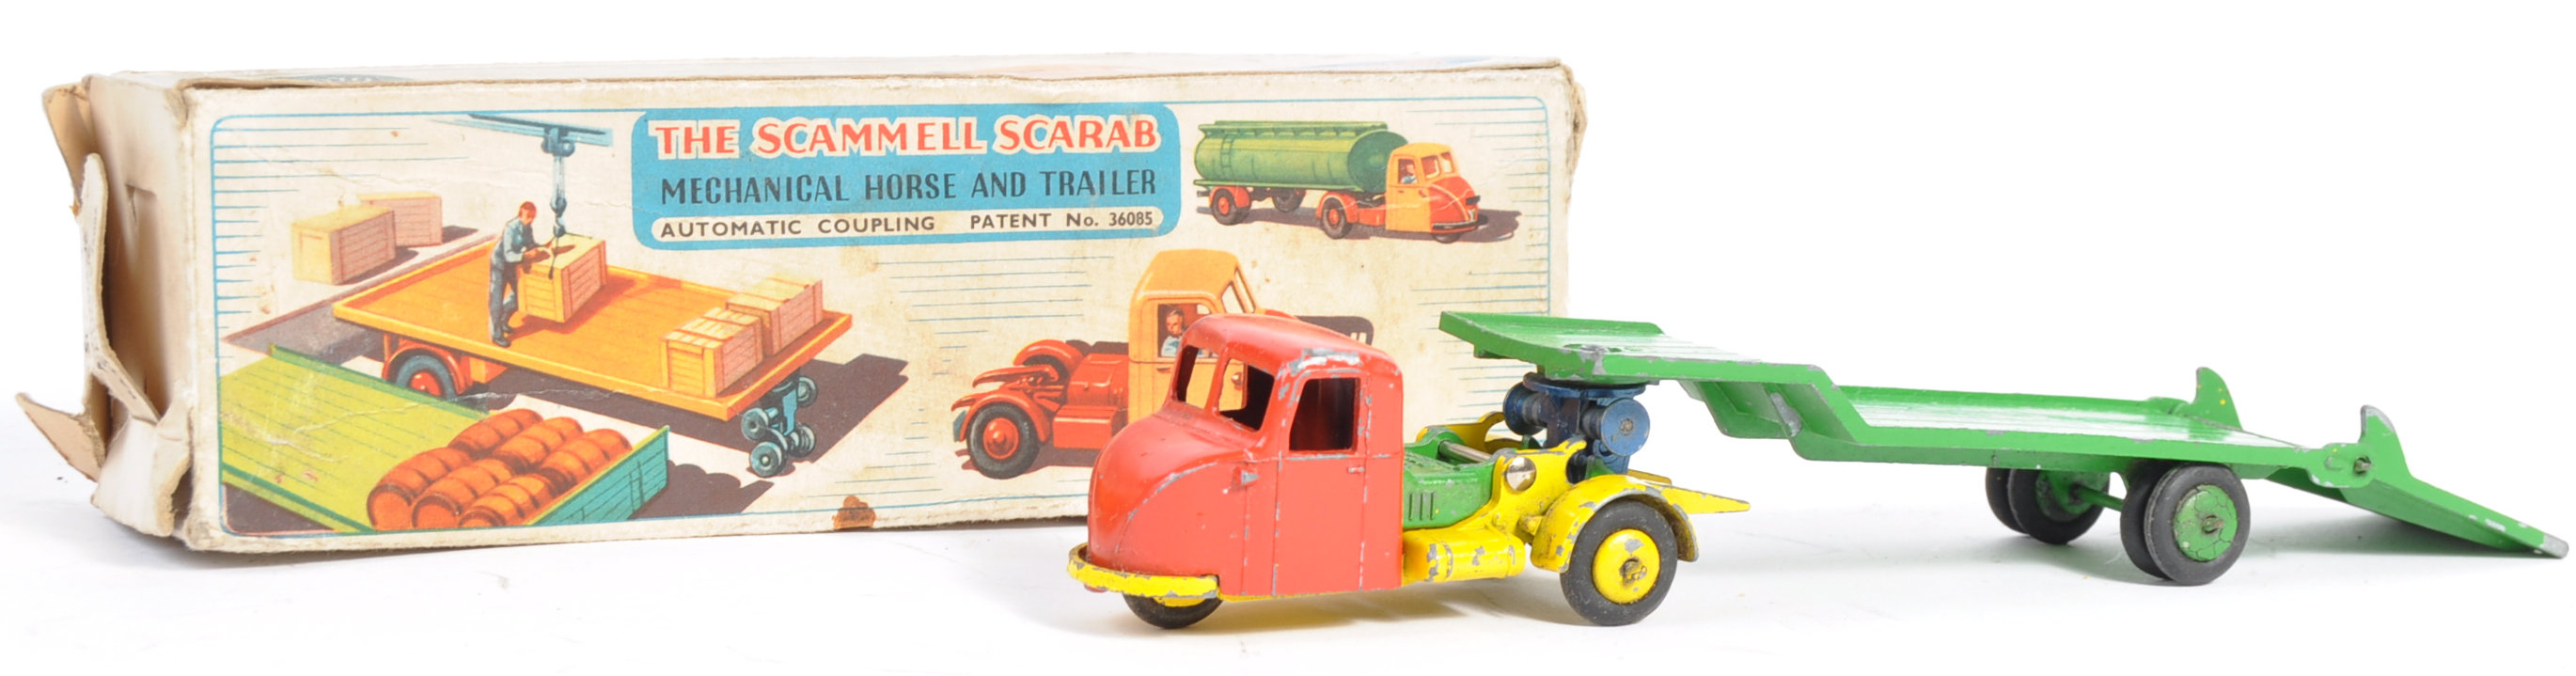 RARE VINTAGE CRESCENT TOYS DIECAST MODEL SCAMMELL SCARAB